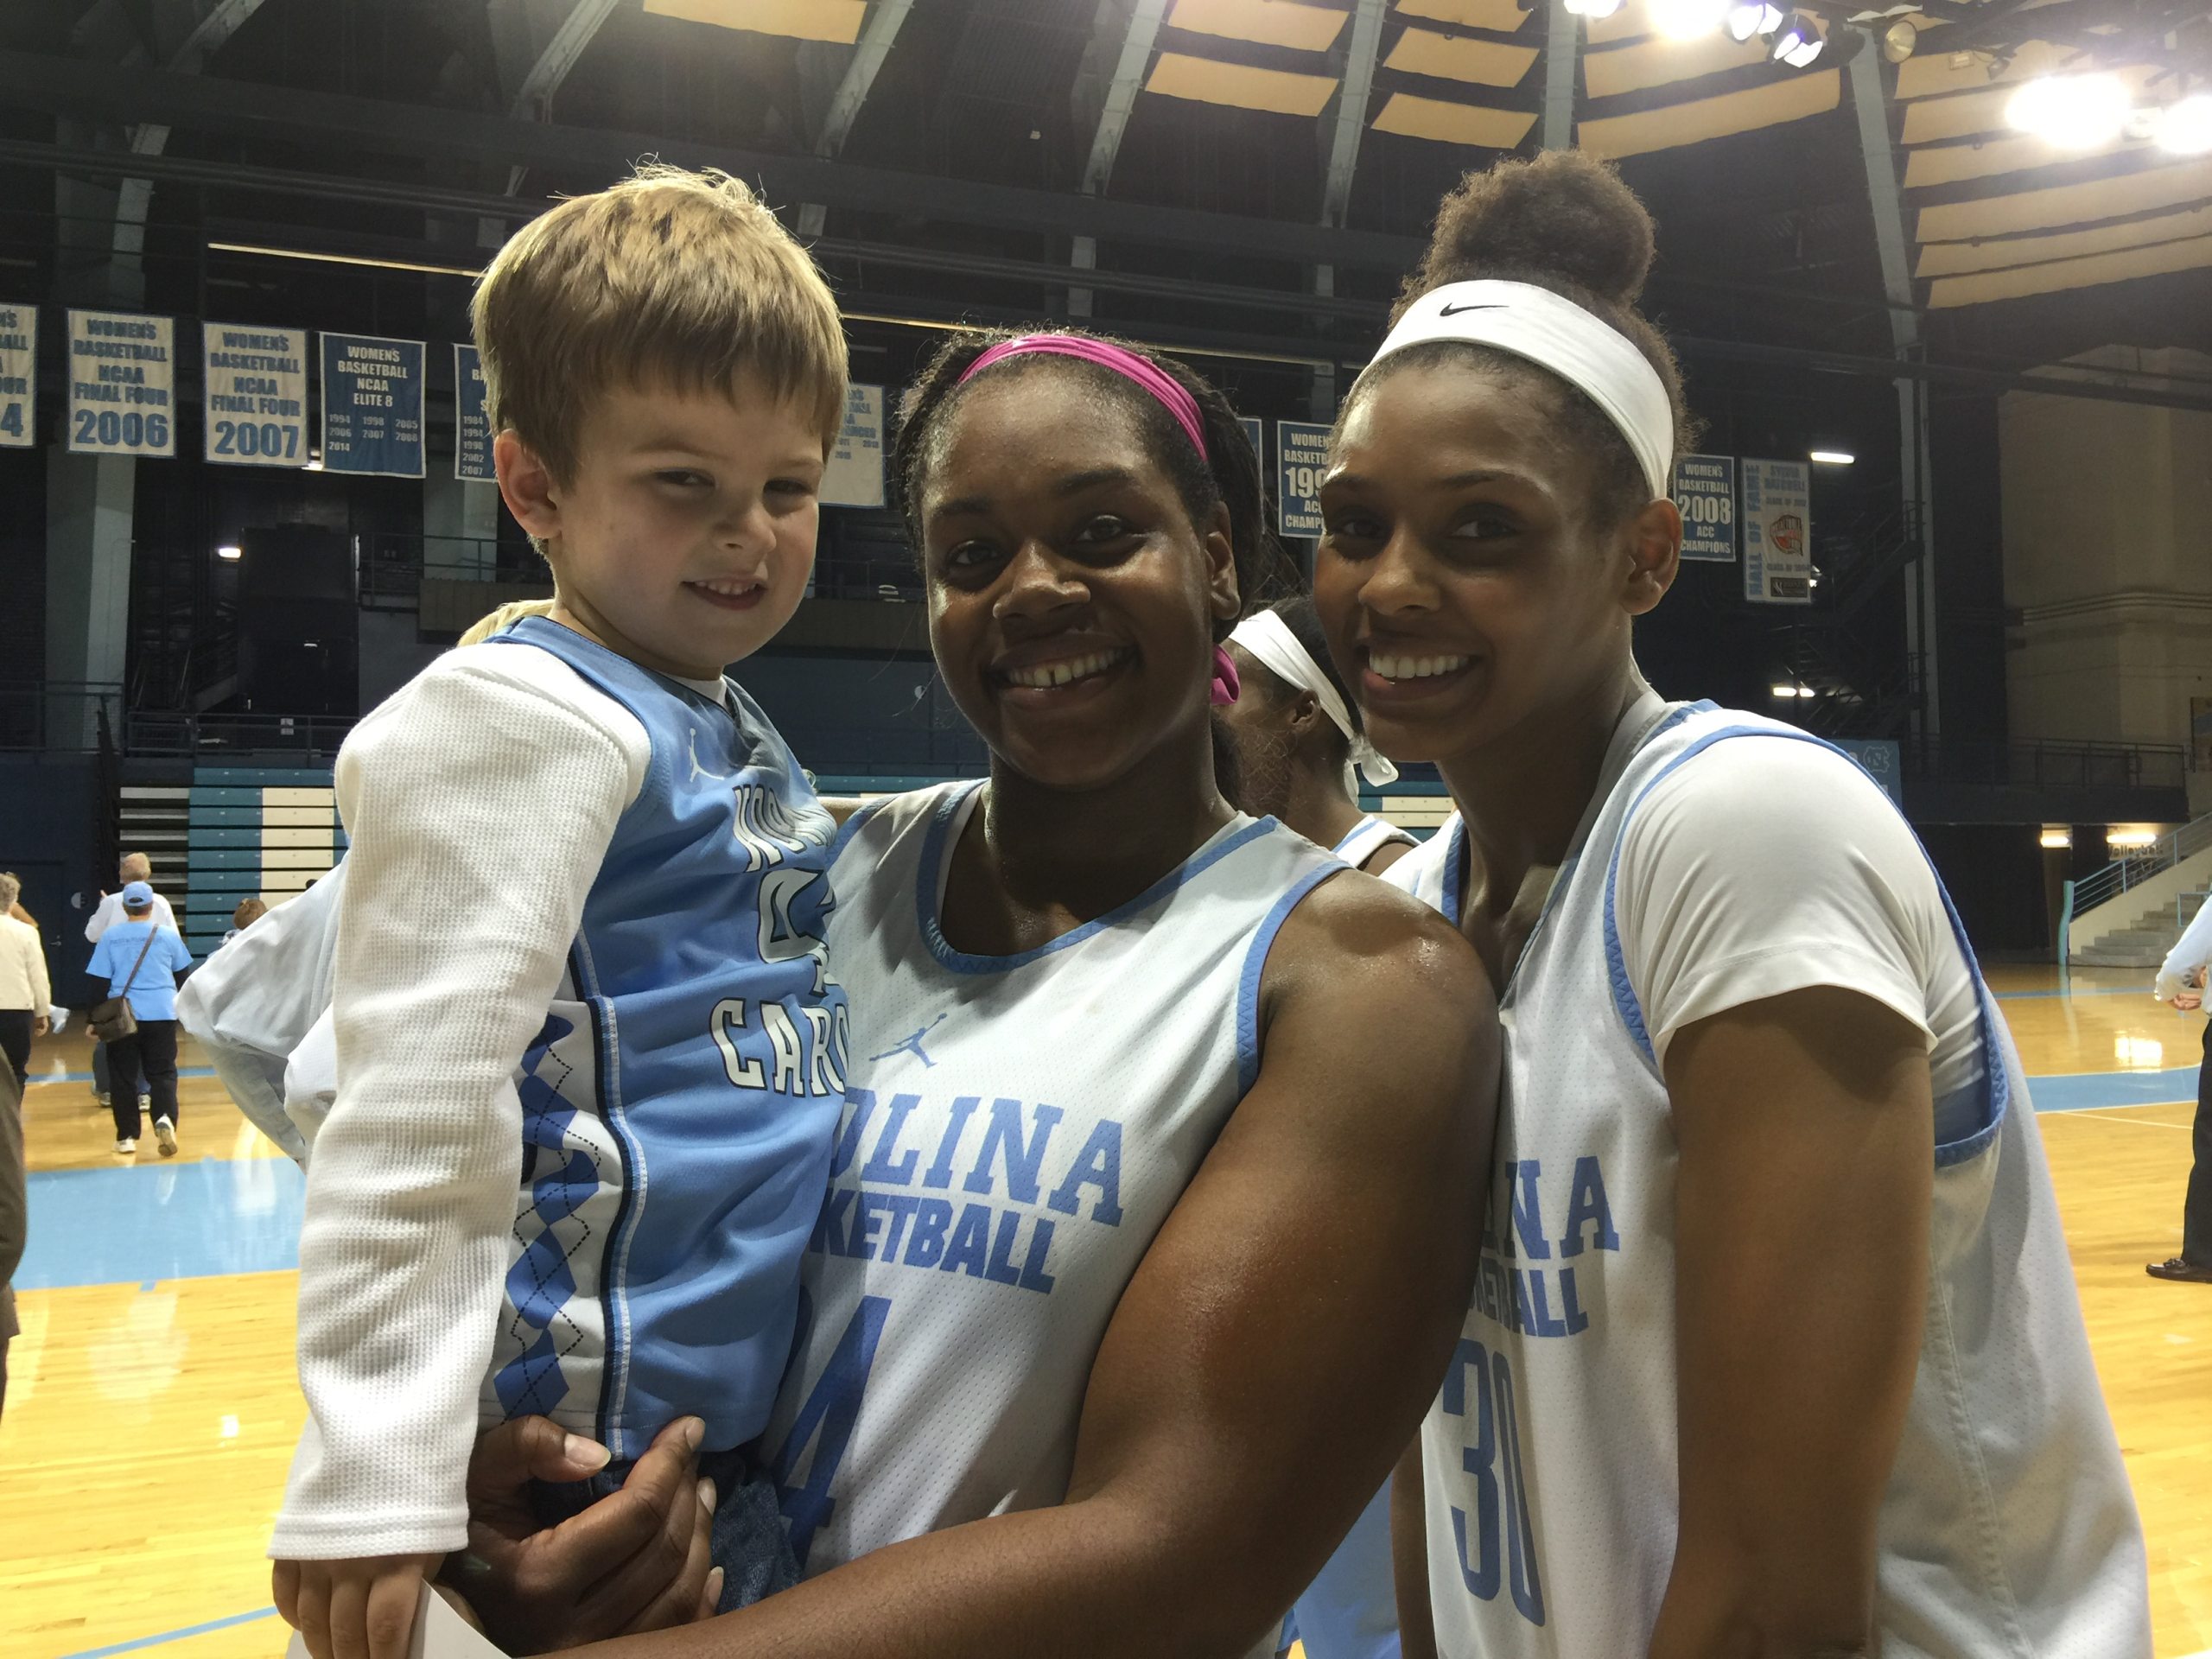 Logan Anderson held by two Carolina women's basketball players after a game.